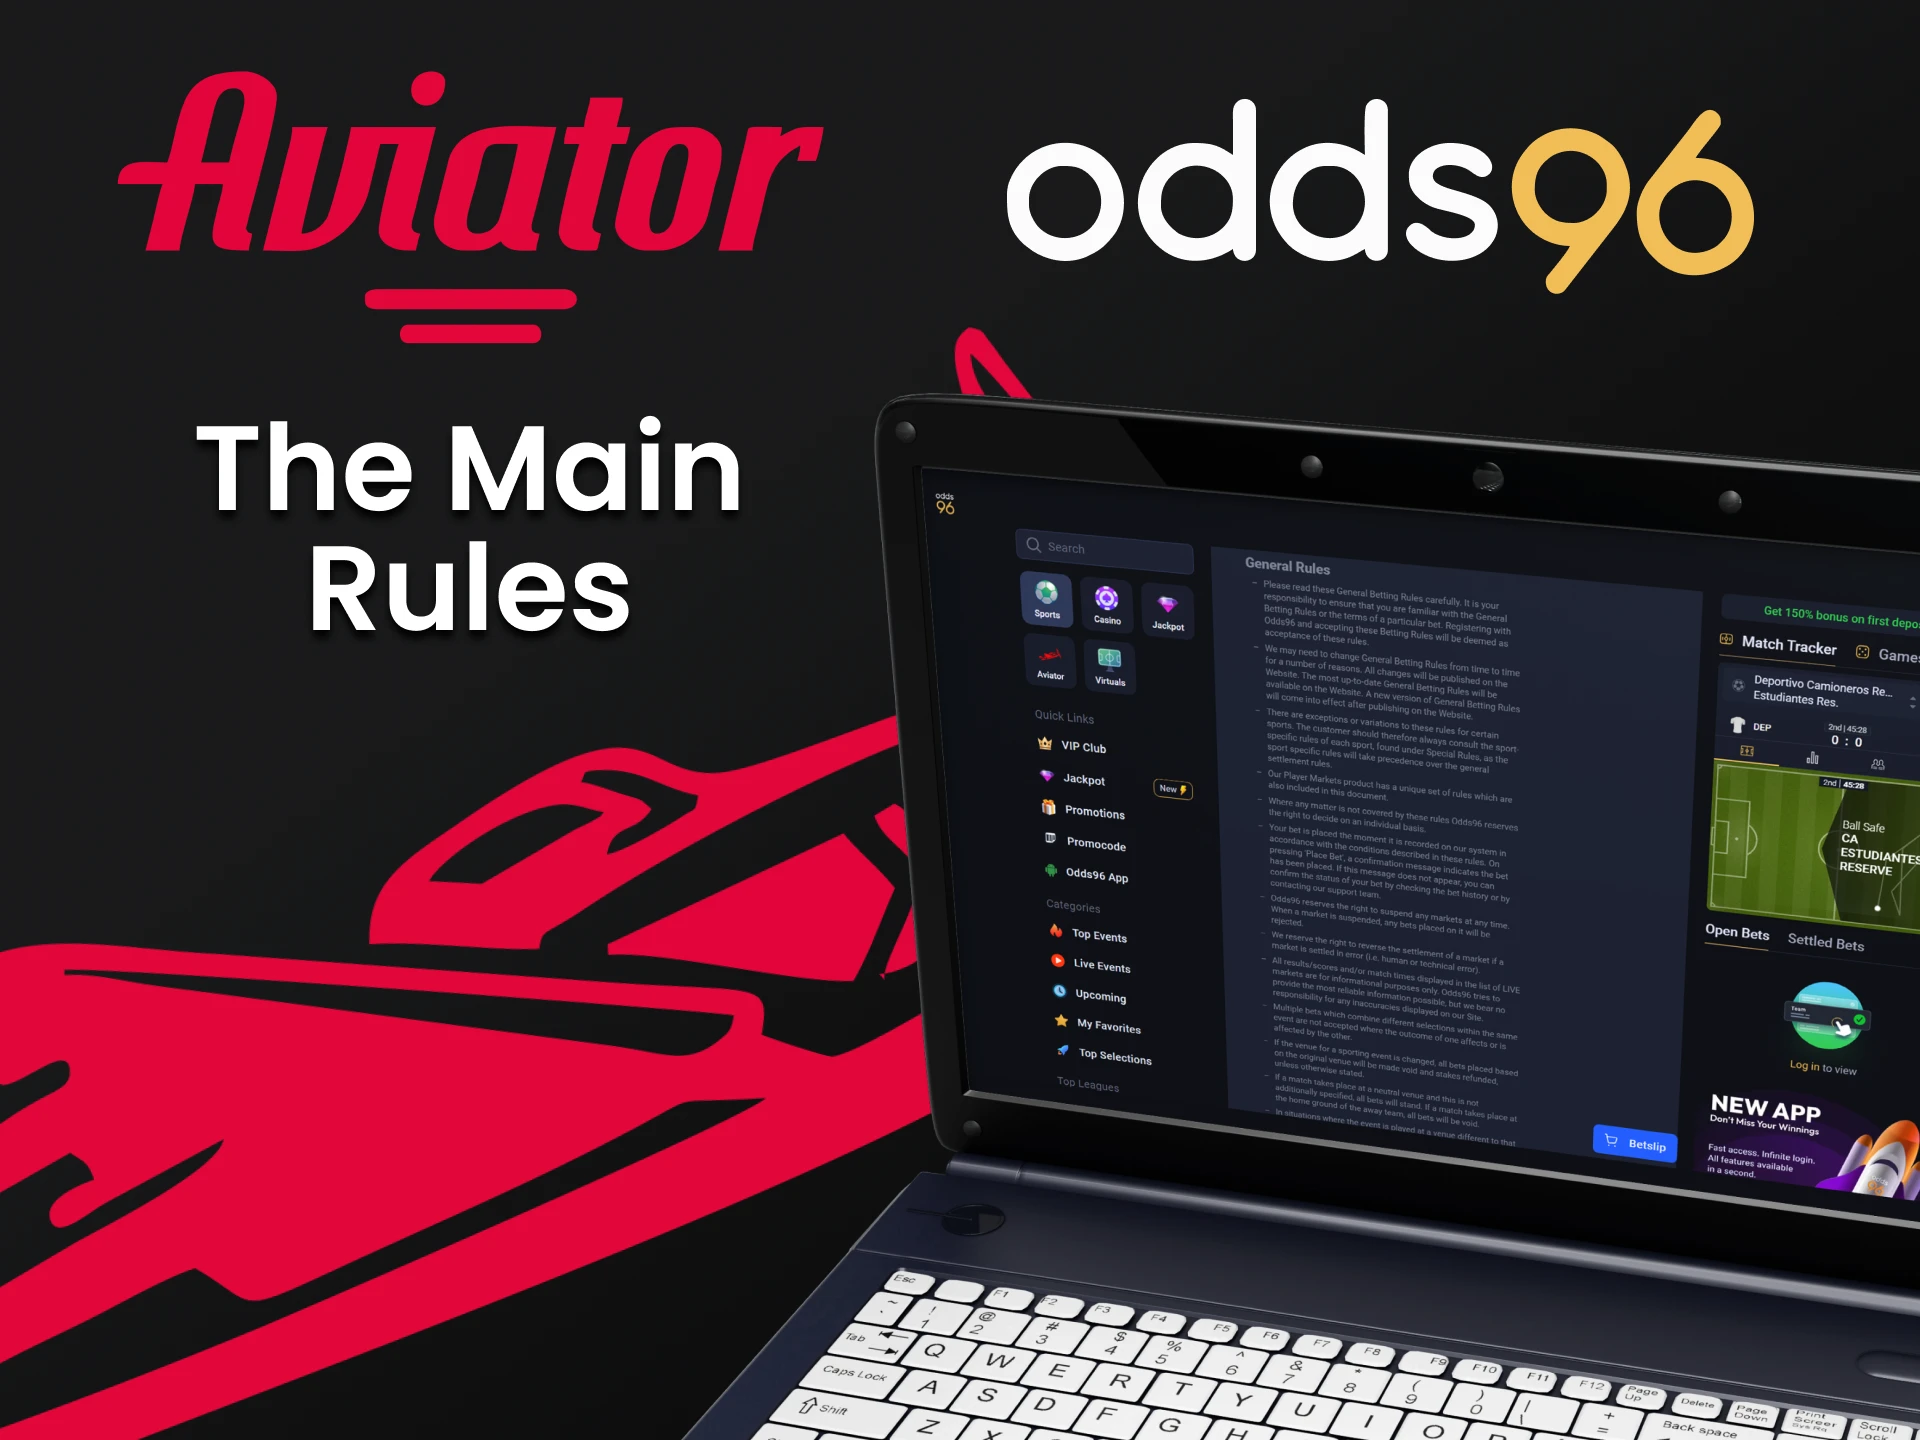 Learn the rules of the Odds96 service for playing Aviator.